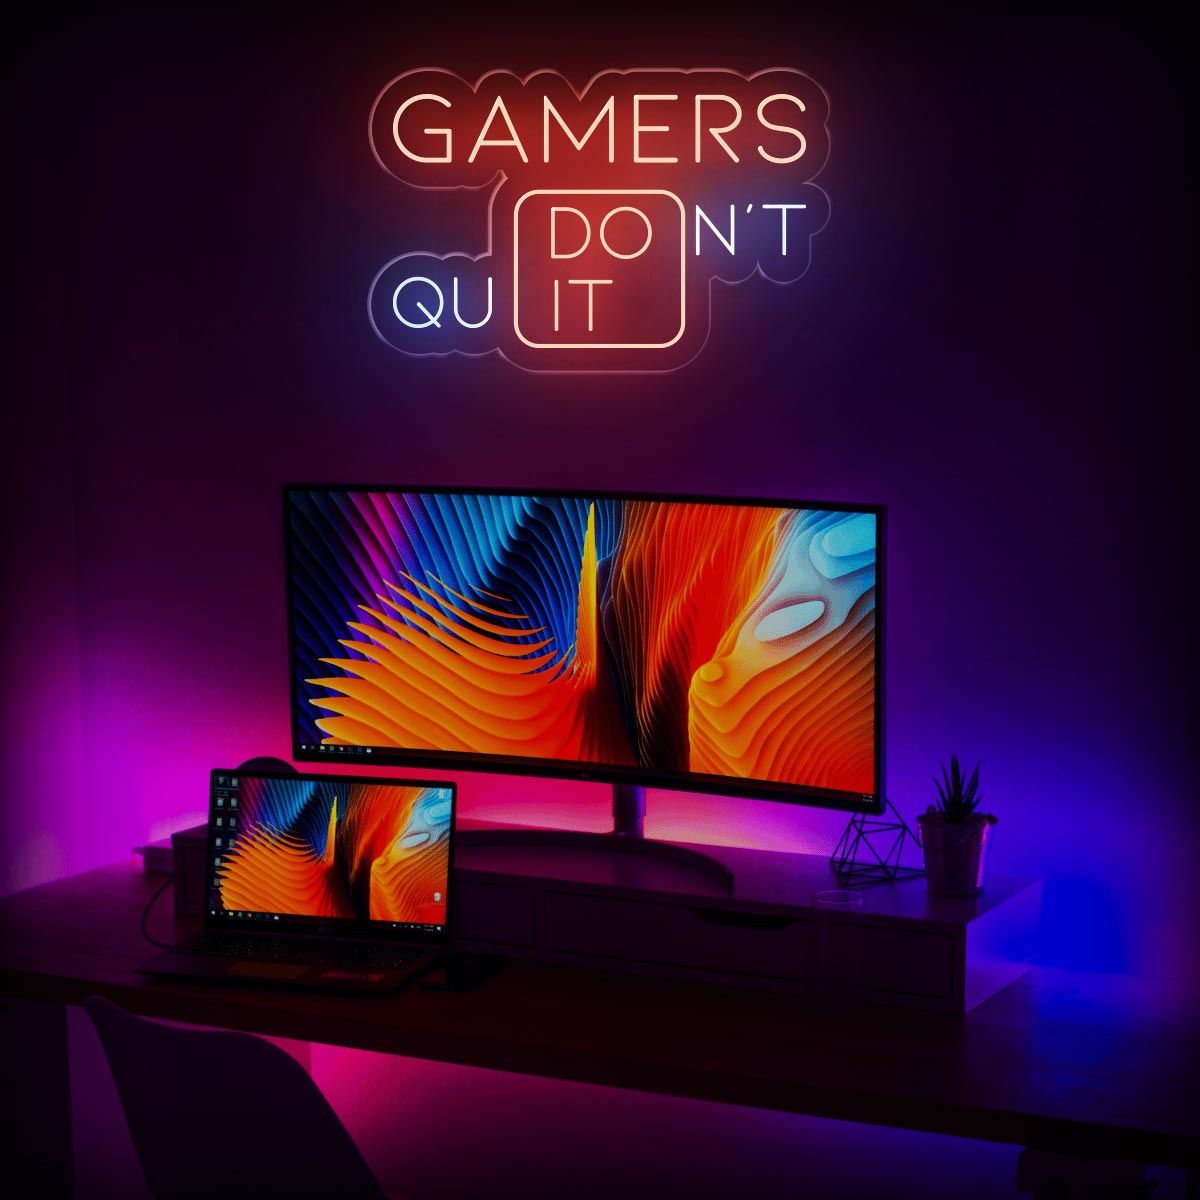 Gamers Don't Quit - Motivational Neon Sign | Game Room Decor - NEONXPERT